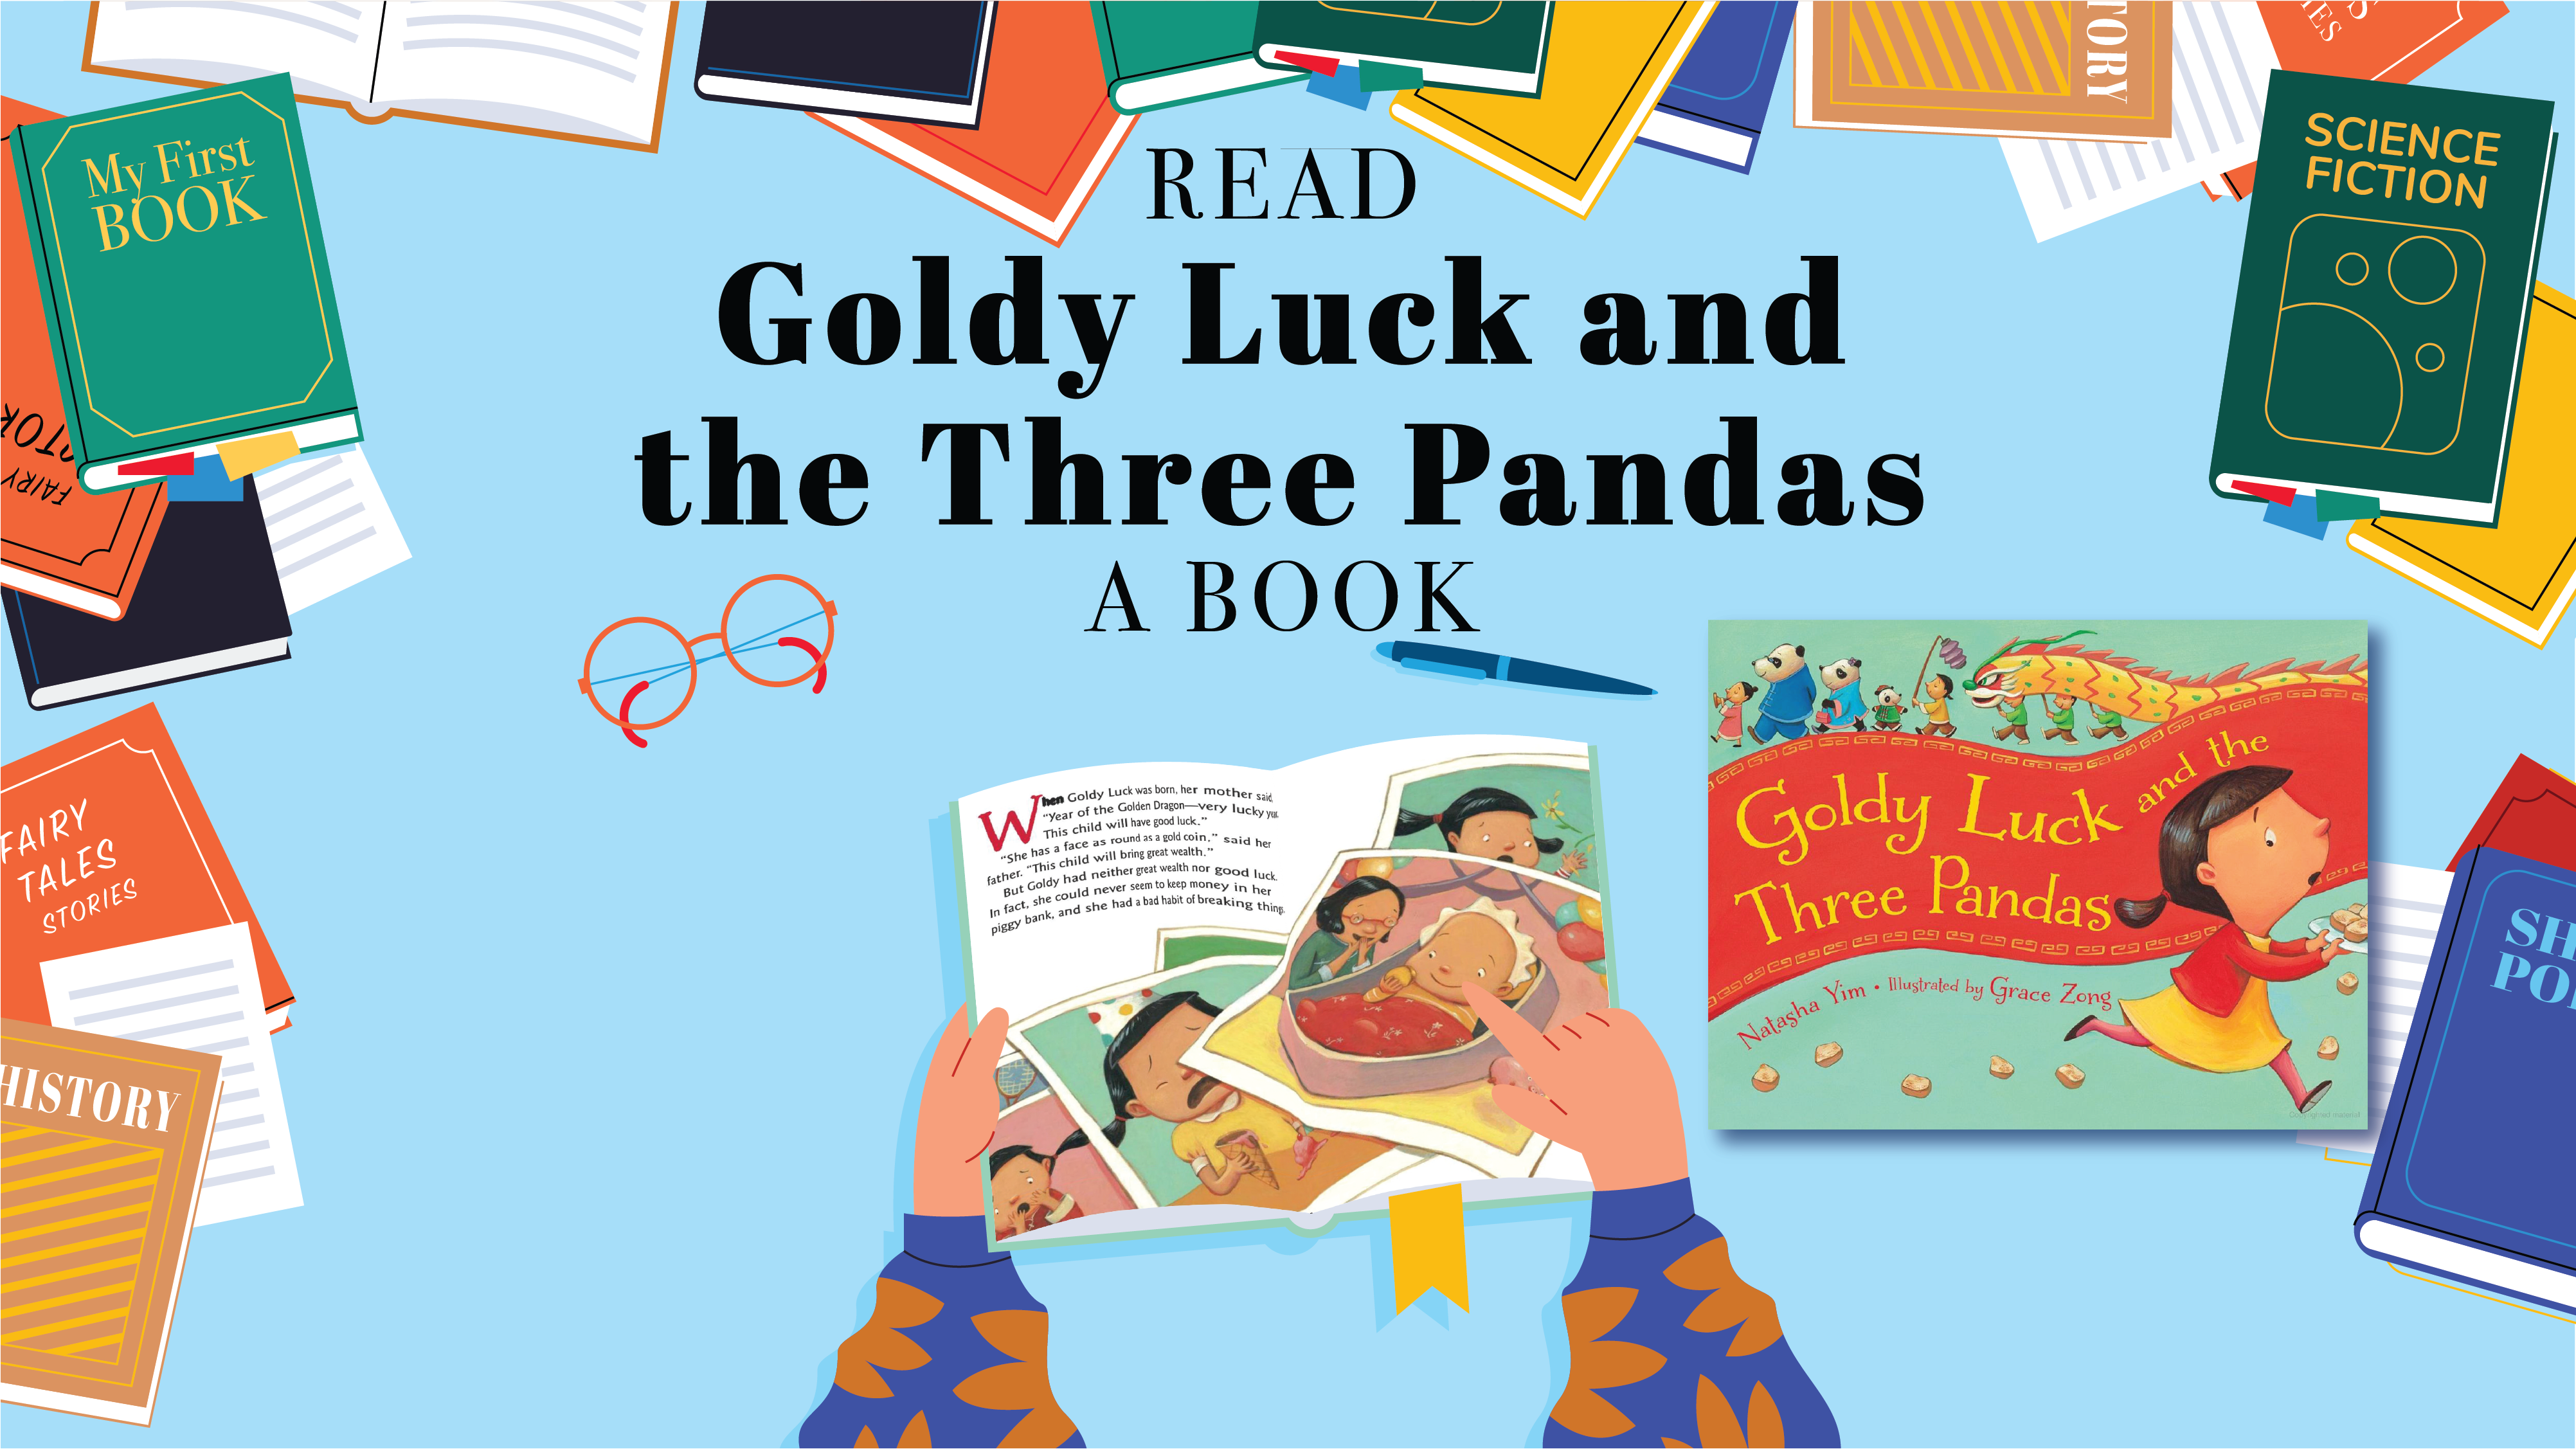 Books border, headline- first line: READ second line: "Goldy Luck and" third line: "the Three Pandas" fourth: A BOOK graphics of orange glasses, blue pen, a person opening a book and point at the two spread pages from "Goldy Luck and the Three Pandas". The cover of "Goldy Luck and the Three Pandas" on right side.